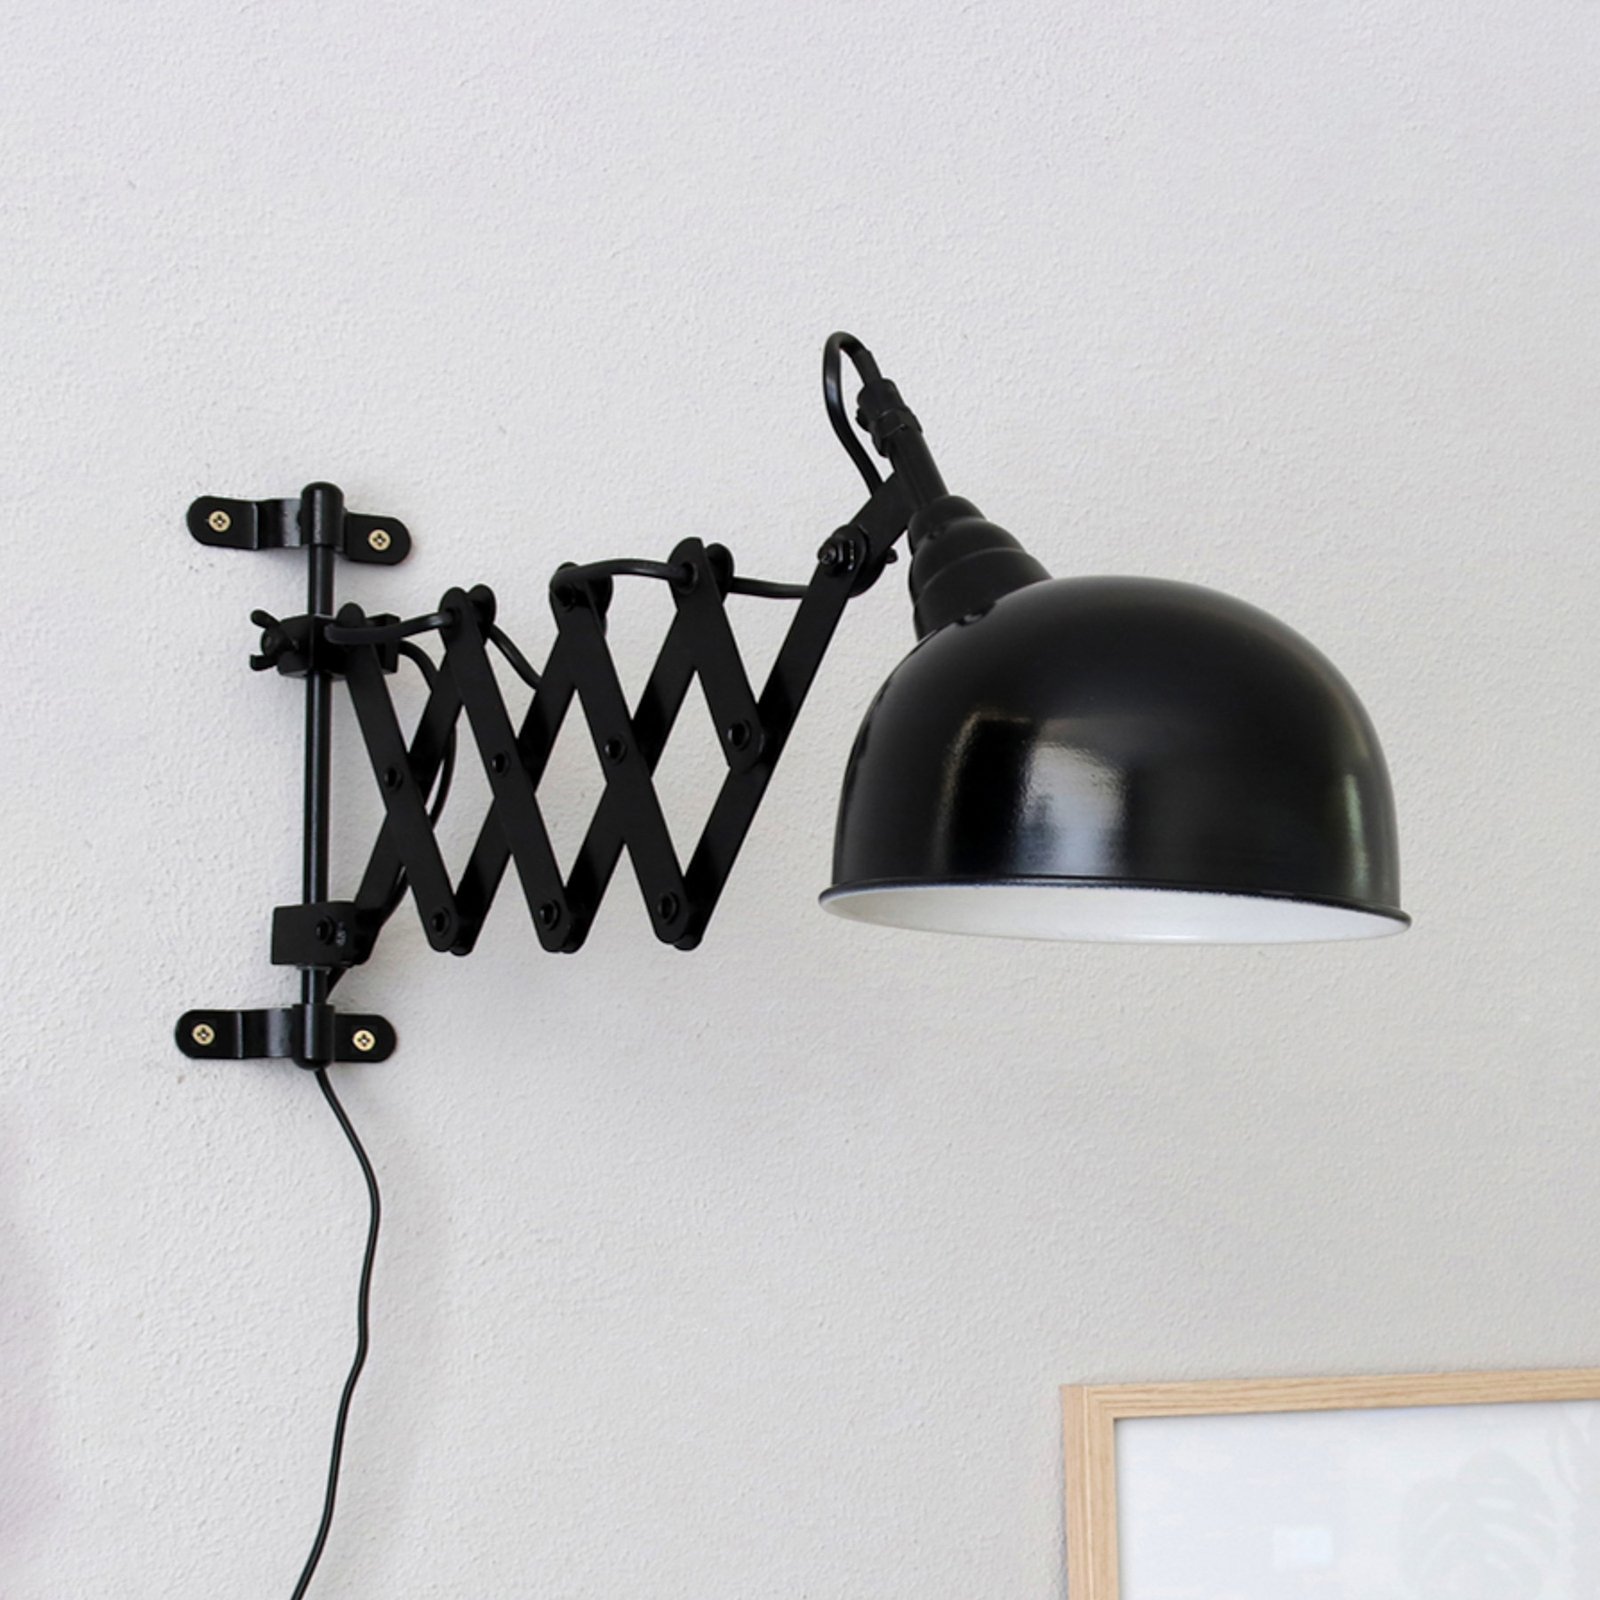 Yorkshire harmonica arm light for the wall, black